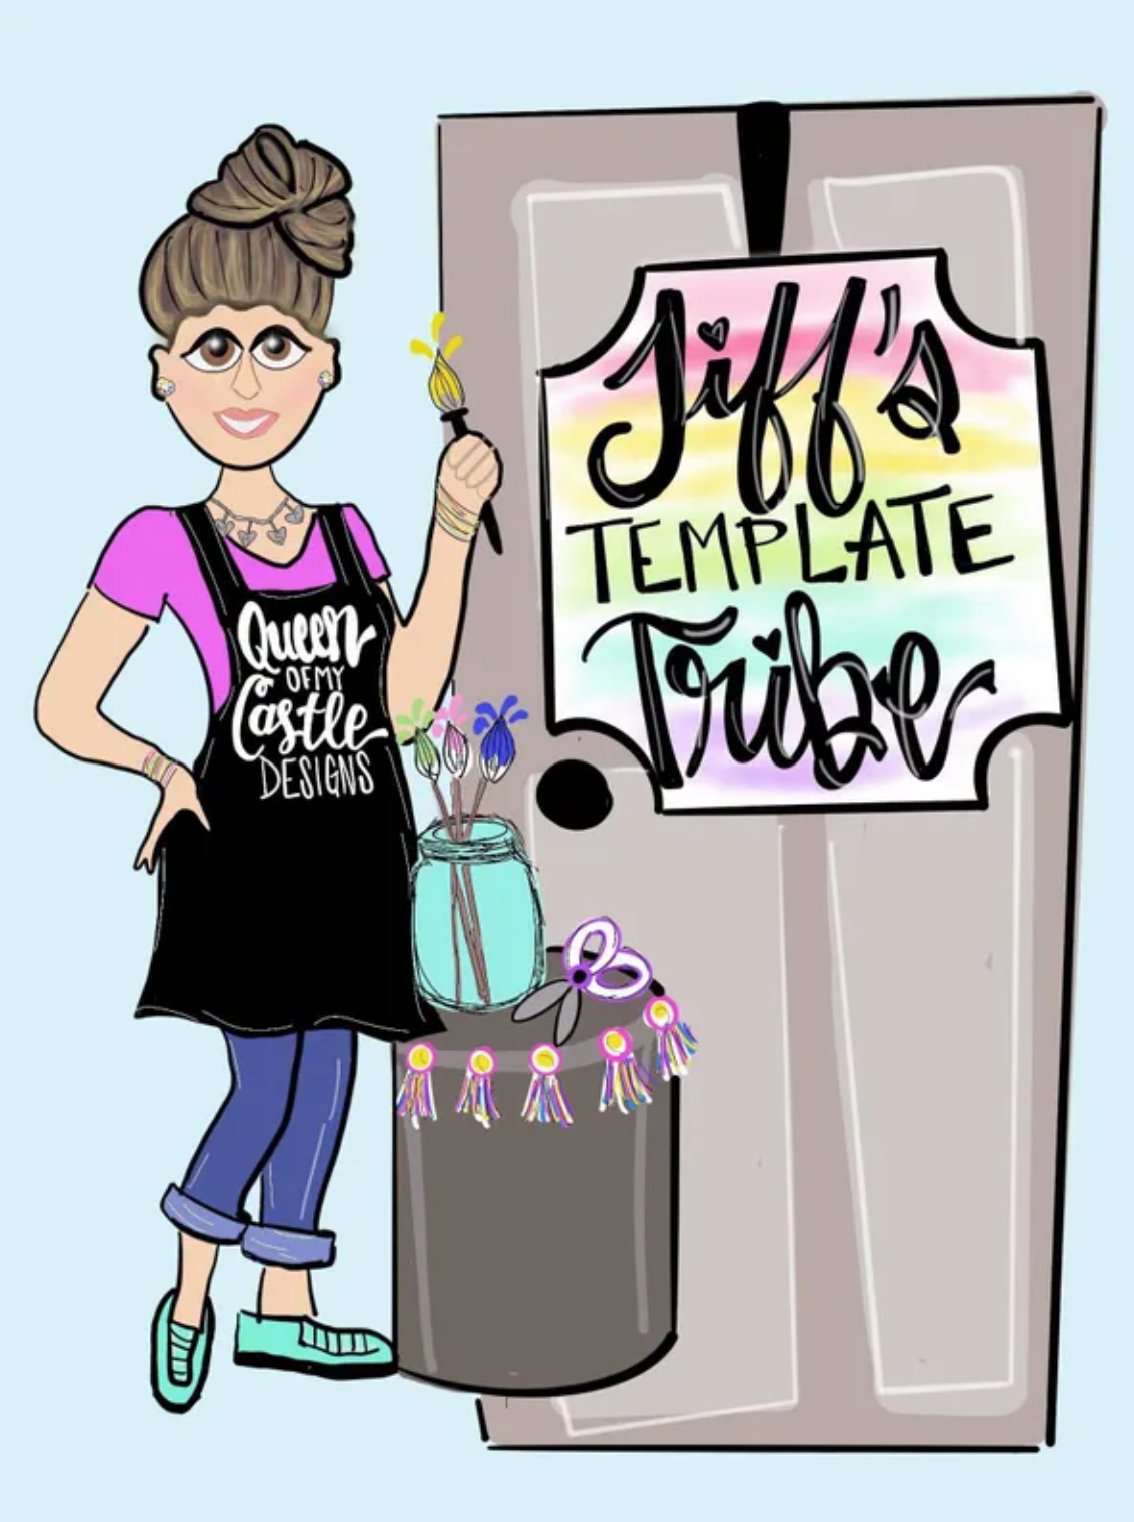 Sketch of Tiff with paintbrush and a door hanger that says 